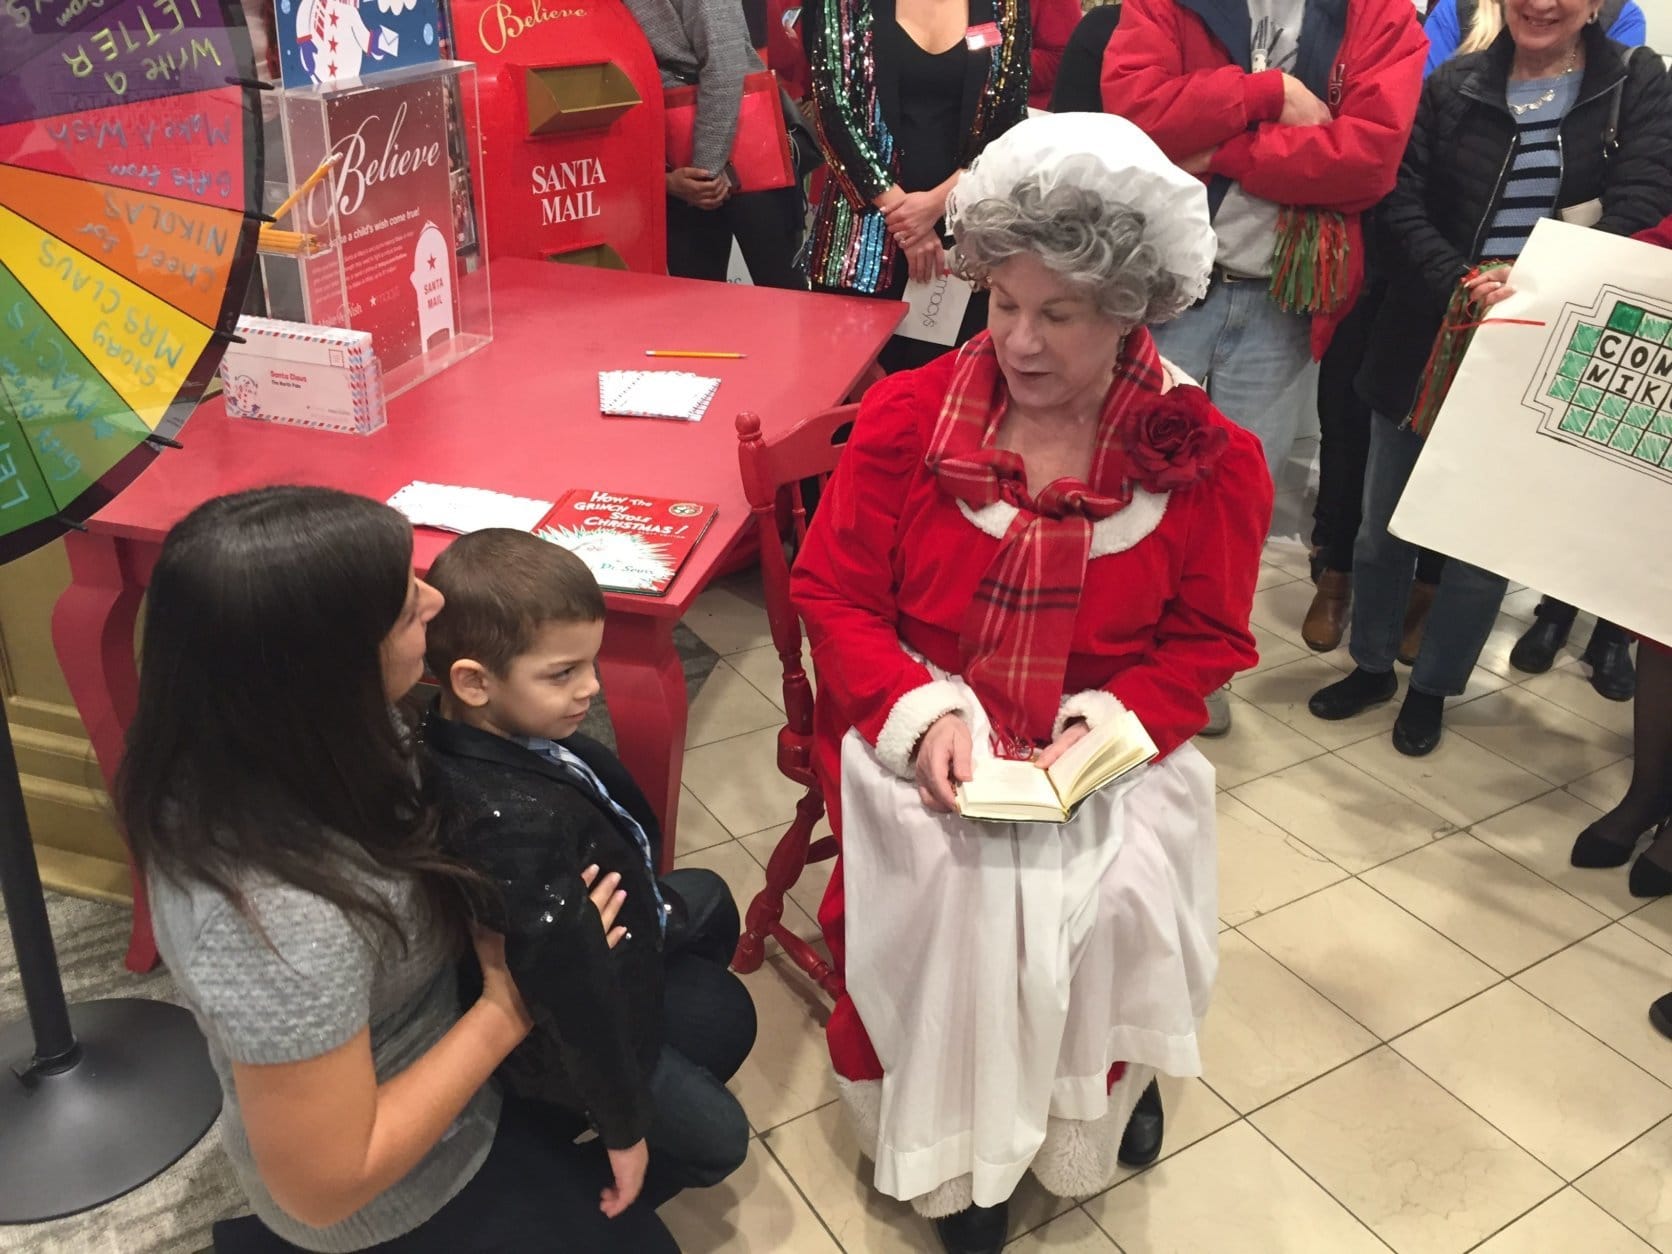 Mrs. Claus was on hand to read “The Night Before Christmas” to Nikolas. (WTOP/John Domen)